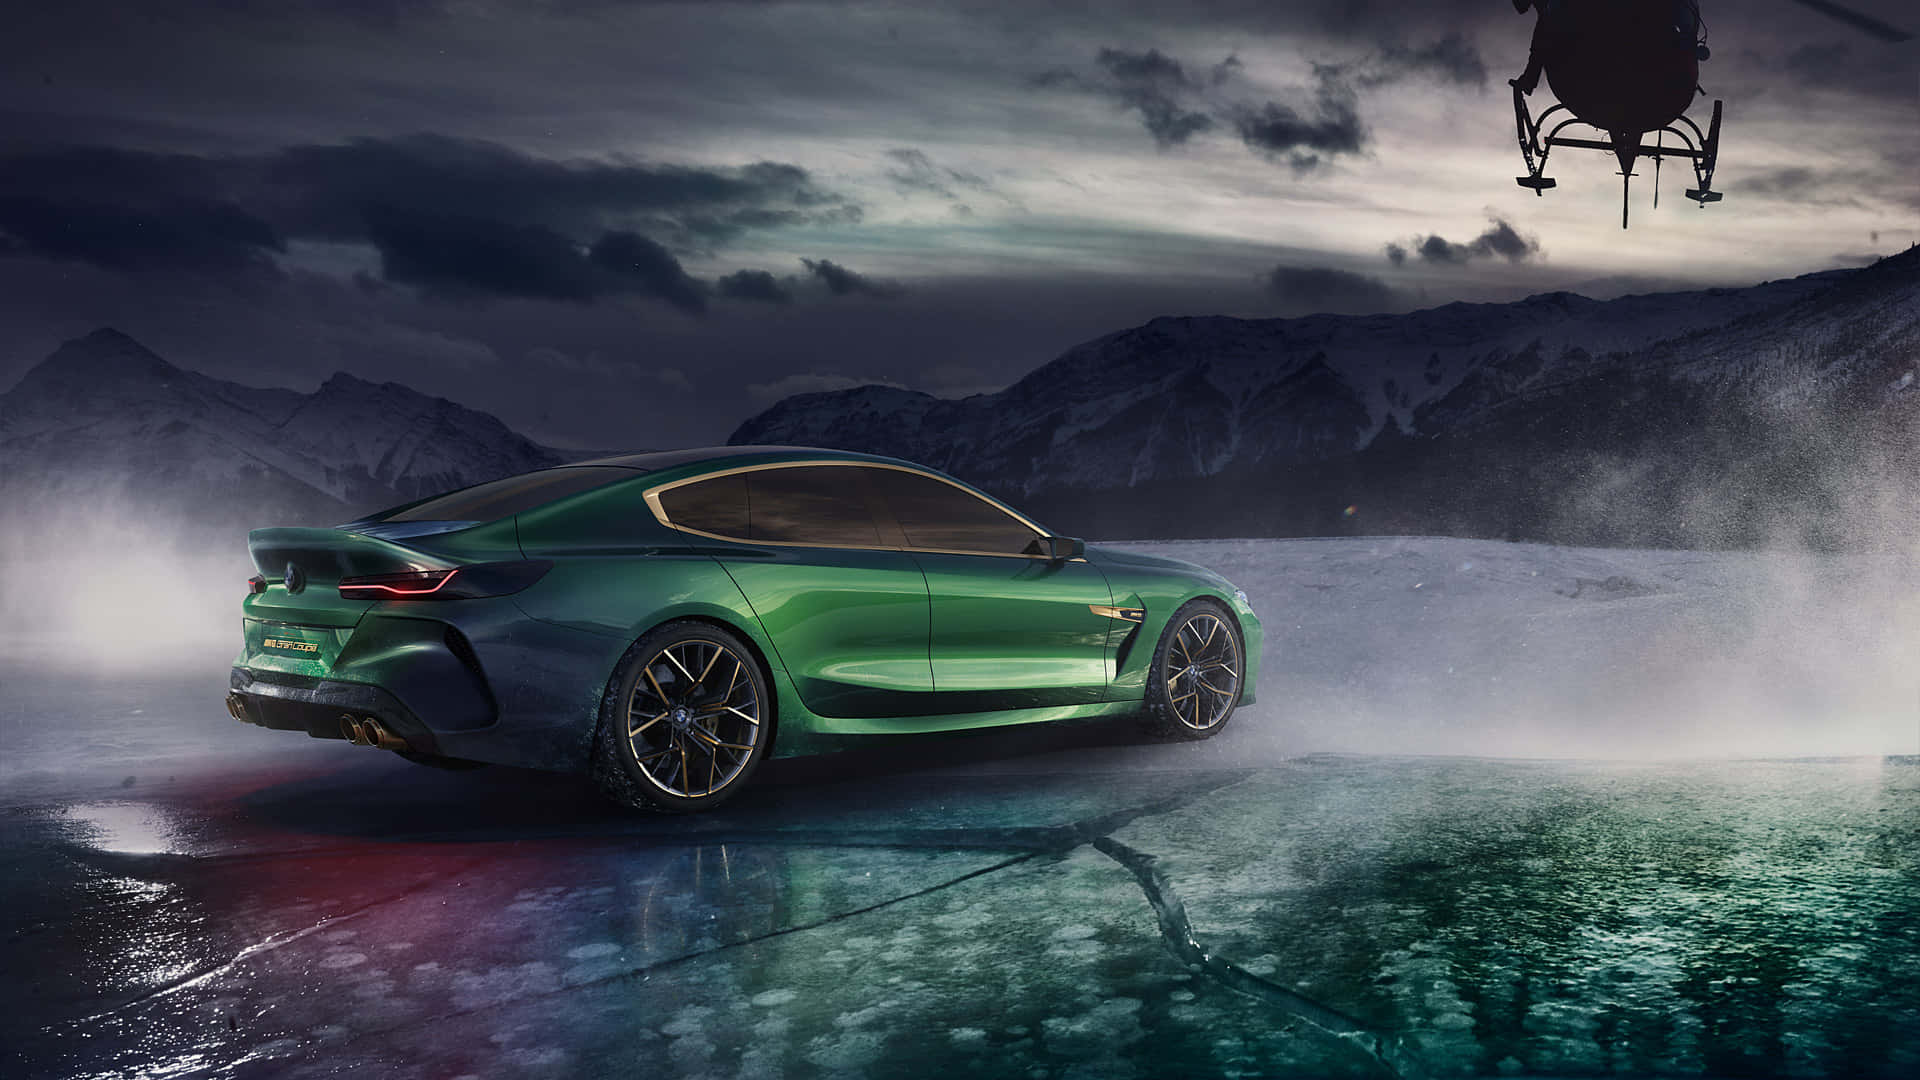 The BMW M8 emerges as a statement of class and performance. Wallpaper